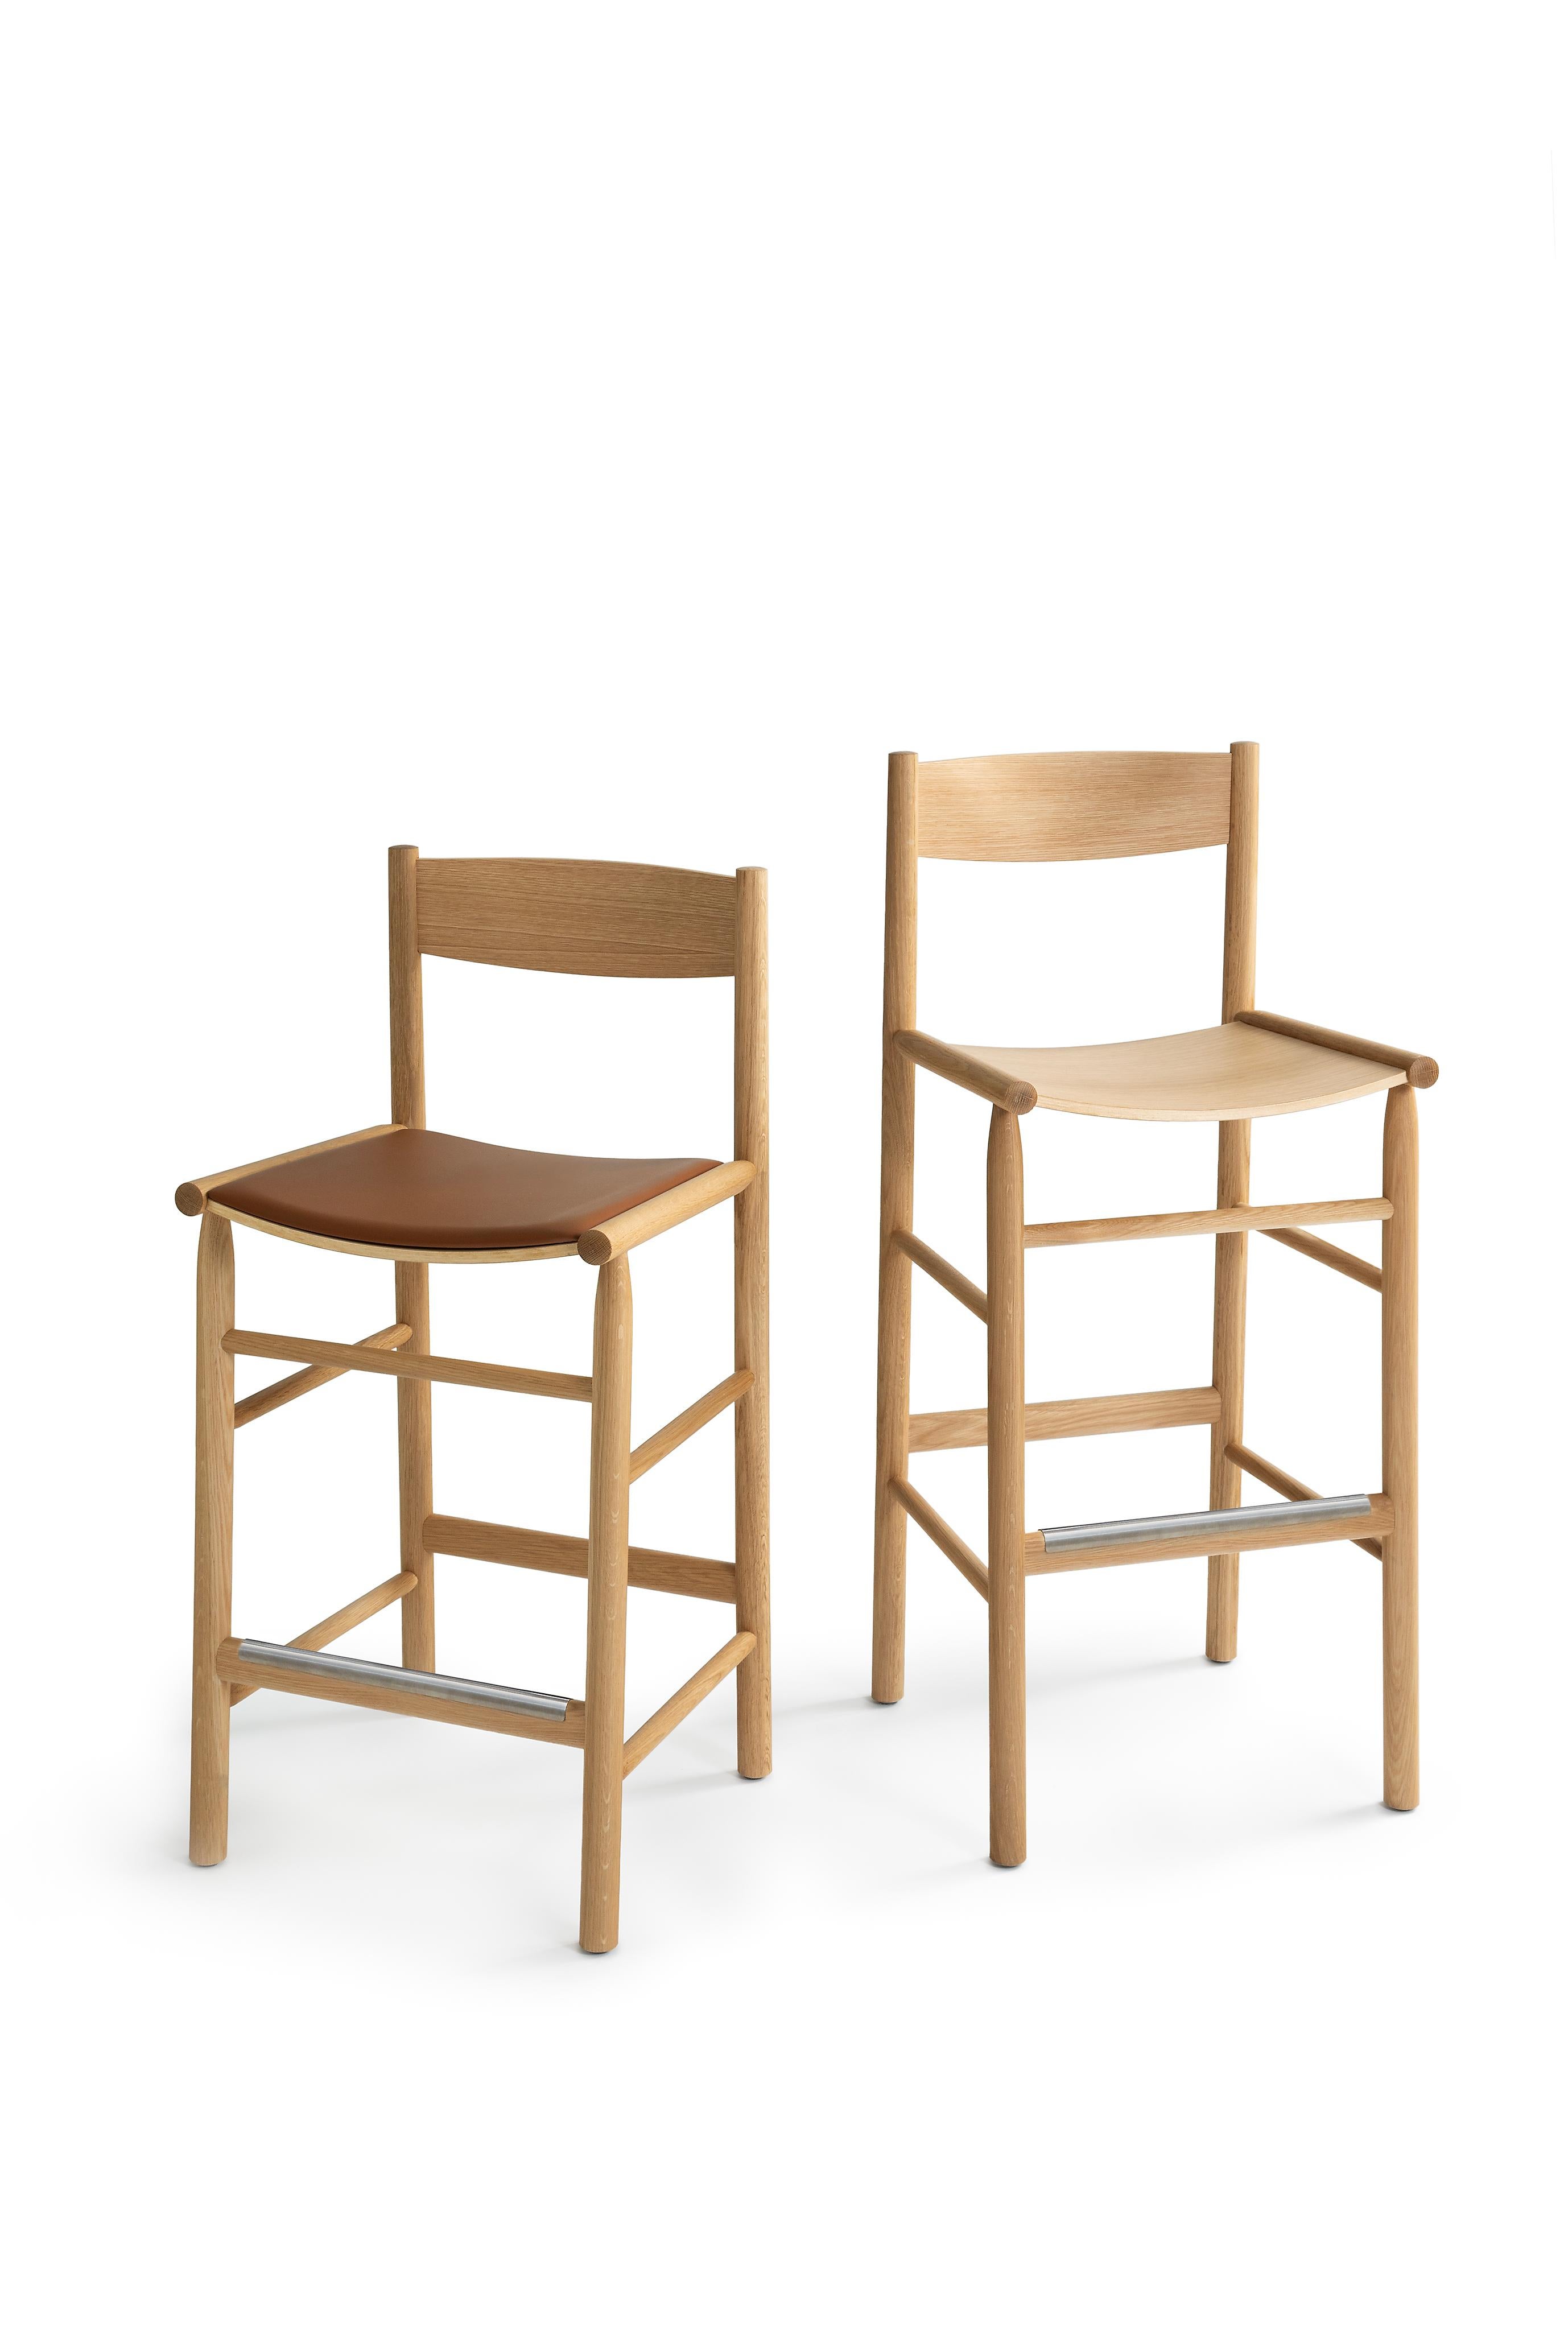 Finnish Akademia High Chair in Oak or Ash by Wesley Walters & Salla Luhtasela For Sale